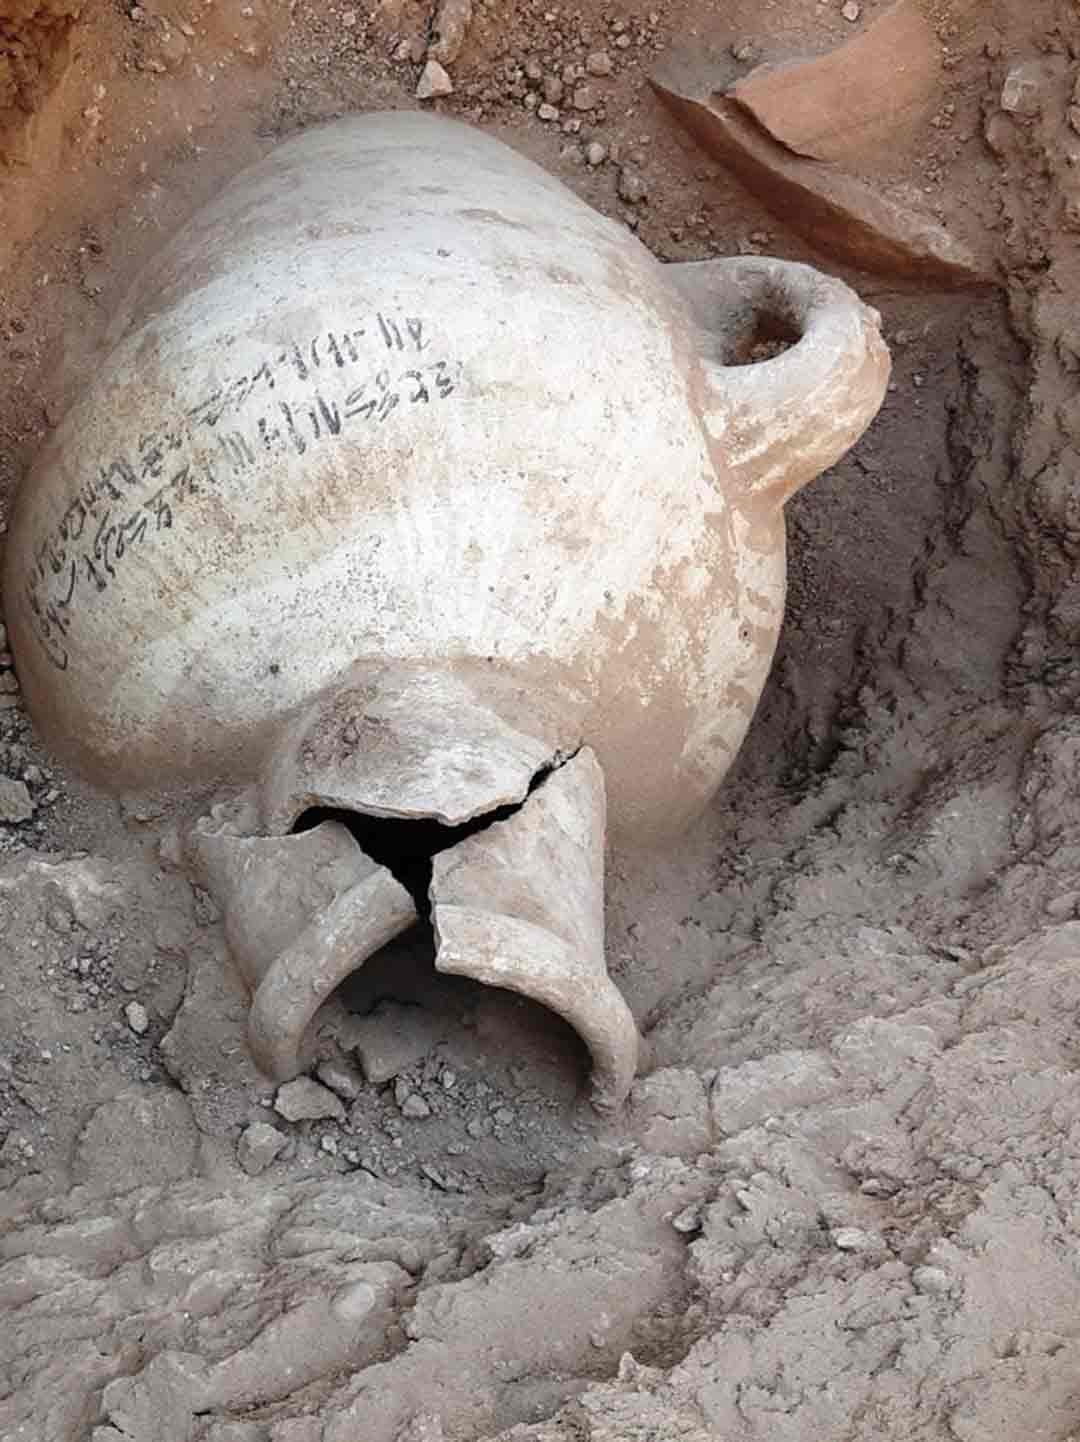 Uncovered ceramic jug discovered in Egypt’s lost city of Aten